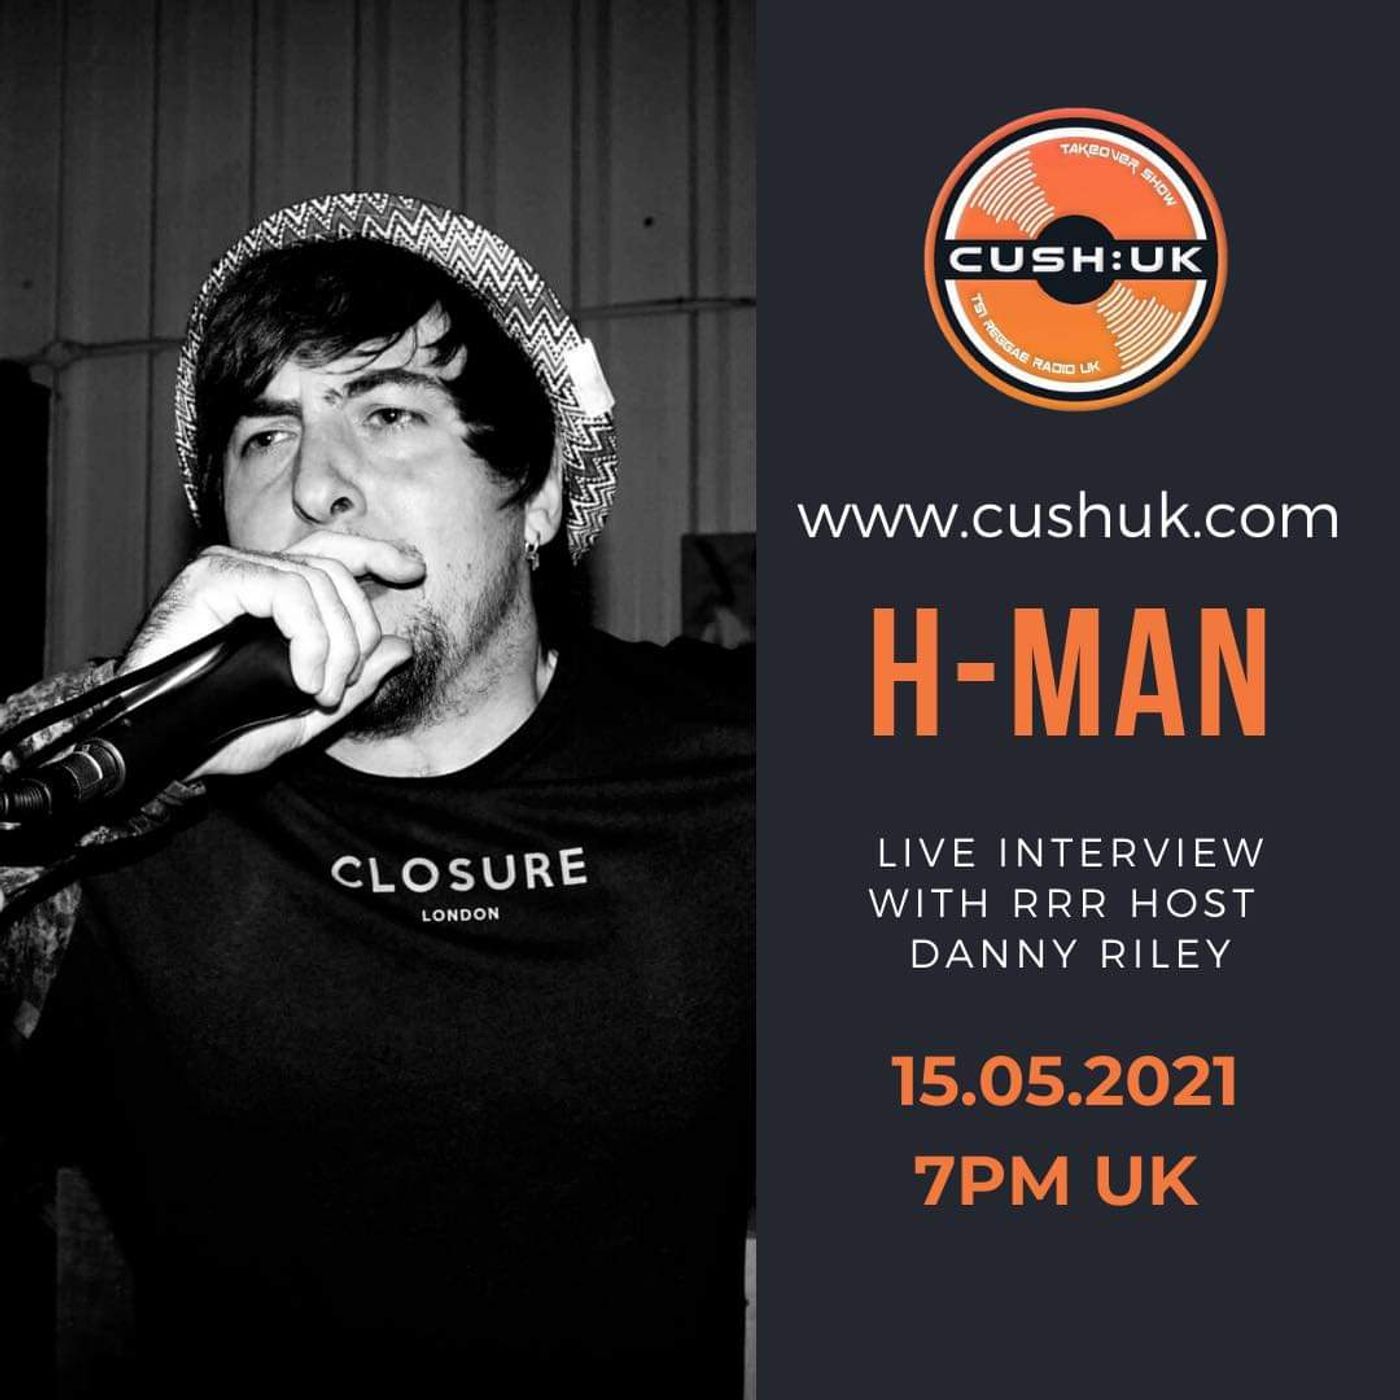 The Cush:UK Takeover Show - EP.177 - The RRR Show With Special Guest H-Man